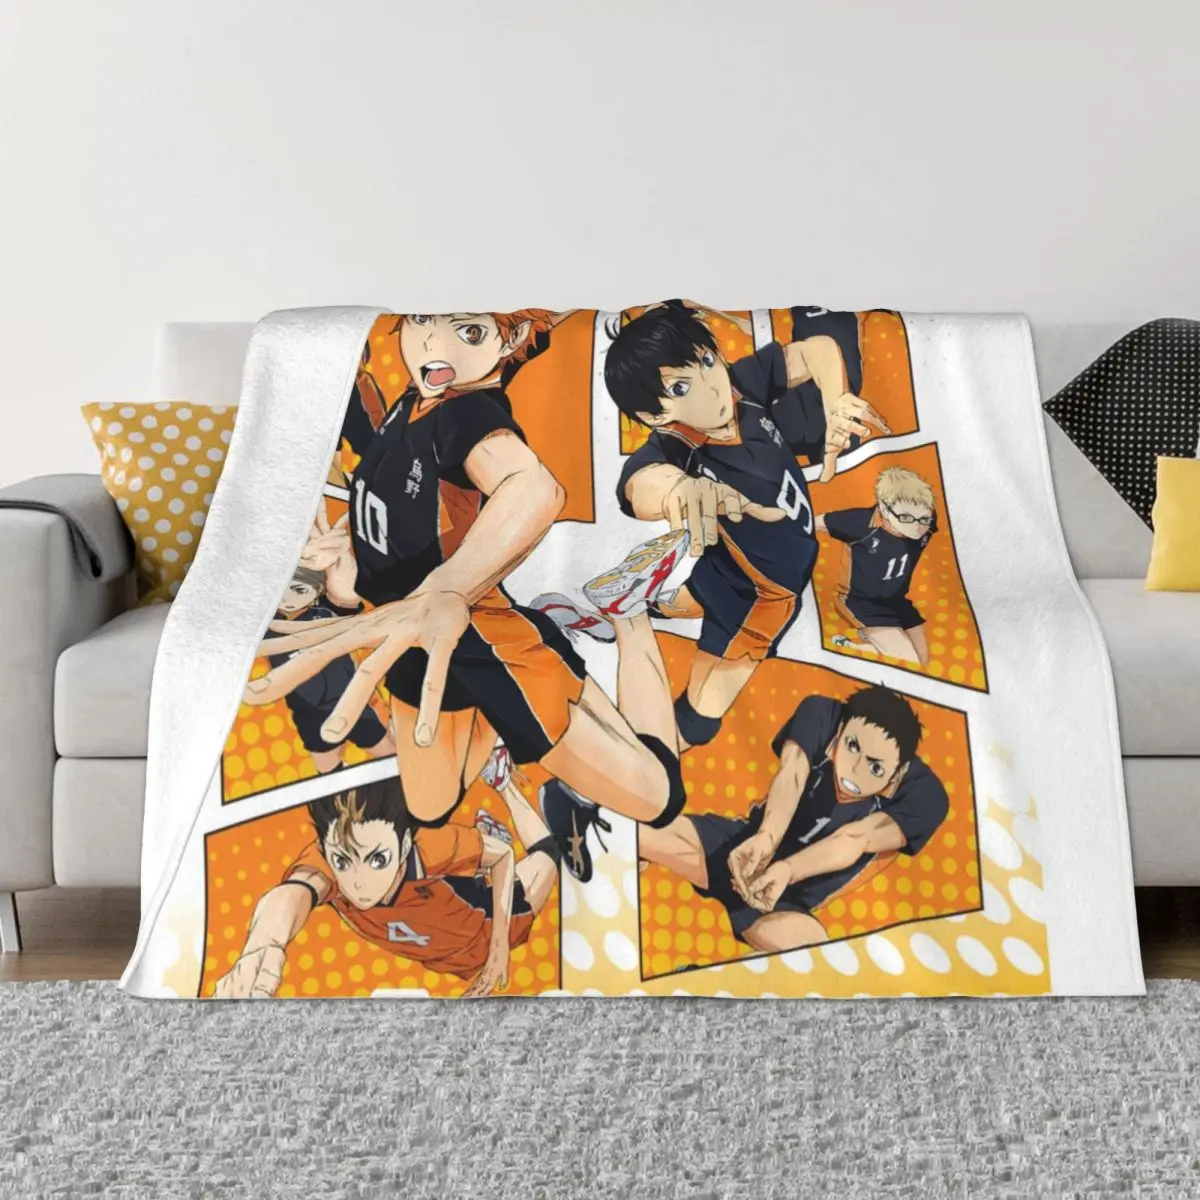 

Anime Haikyuu Flannel Throw Blankets Karasuno Team Volleyball Blanket for Sofa Couch Super Soft Bedroom Quilt